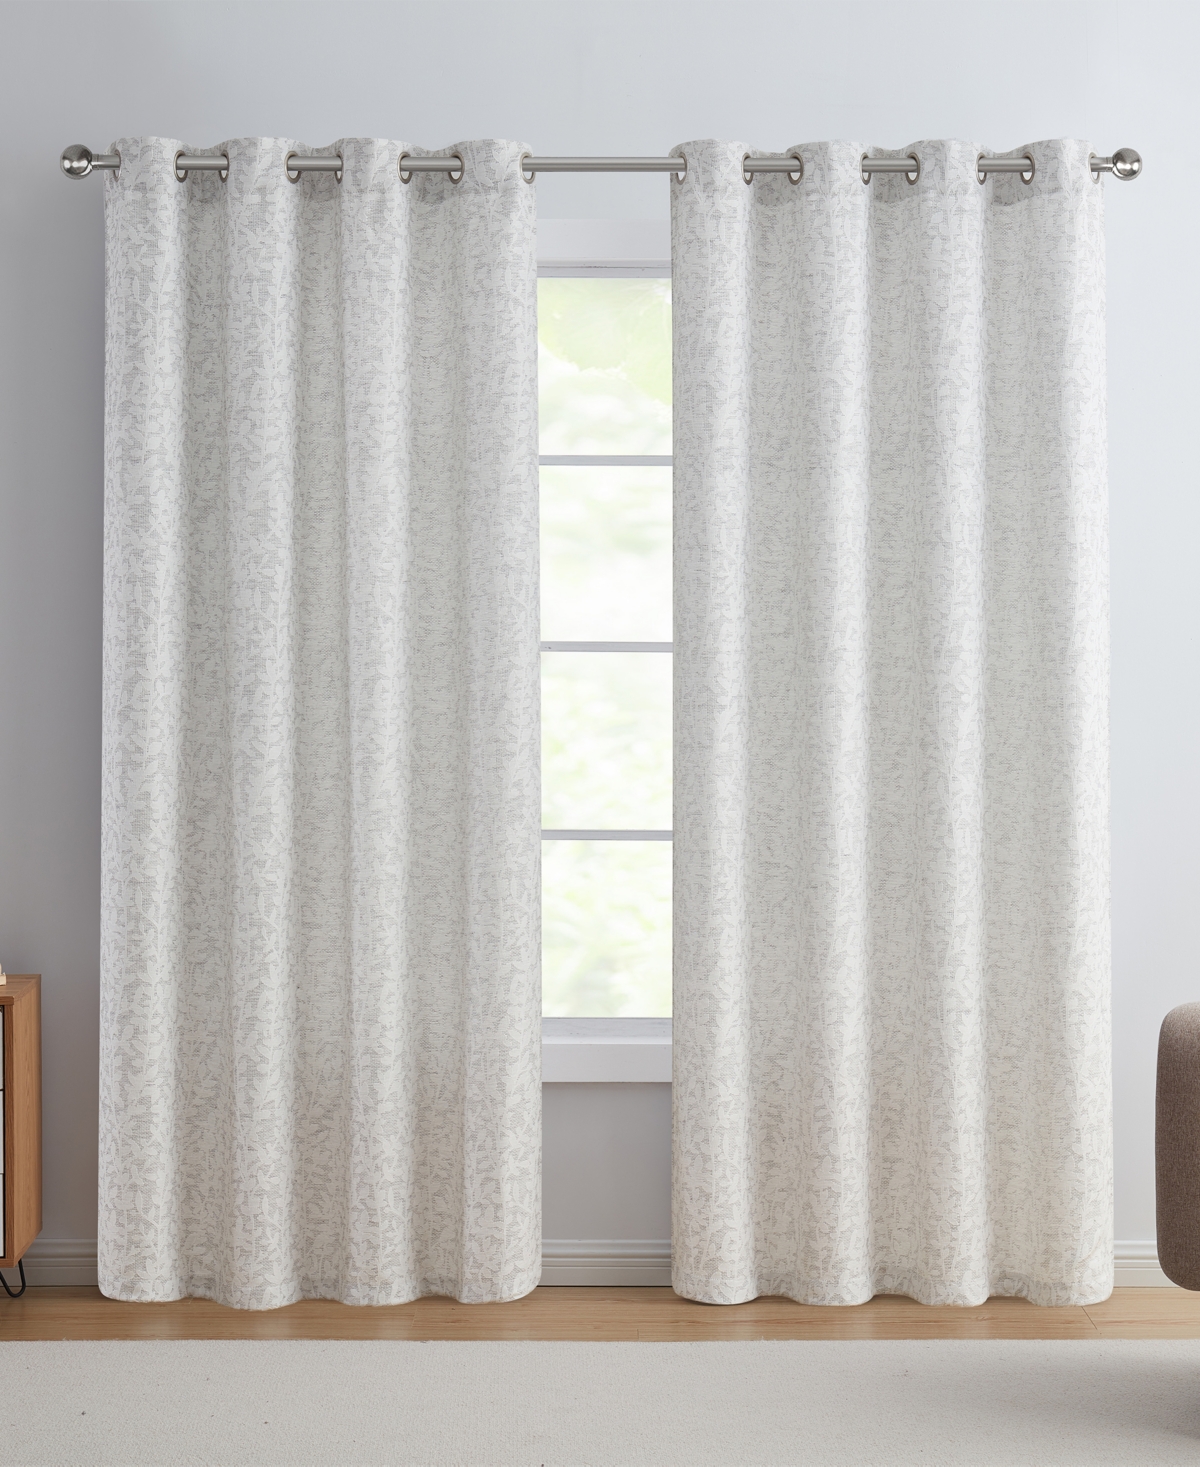 Vcny Home Leah Textured Leaf Grommet Curtain Panel, 54" X 96" In Gray